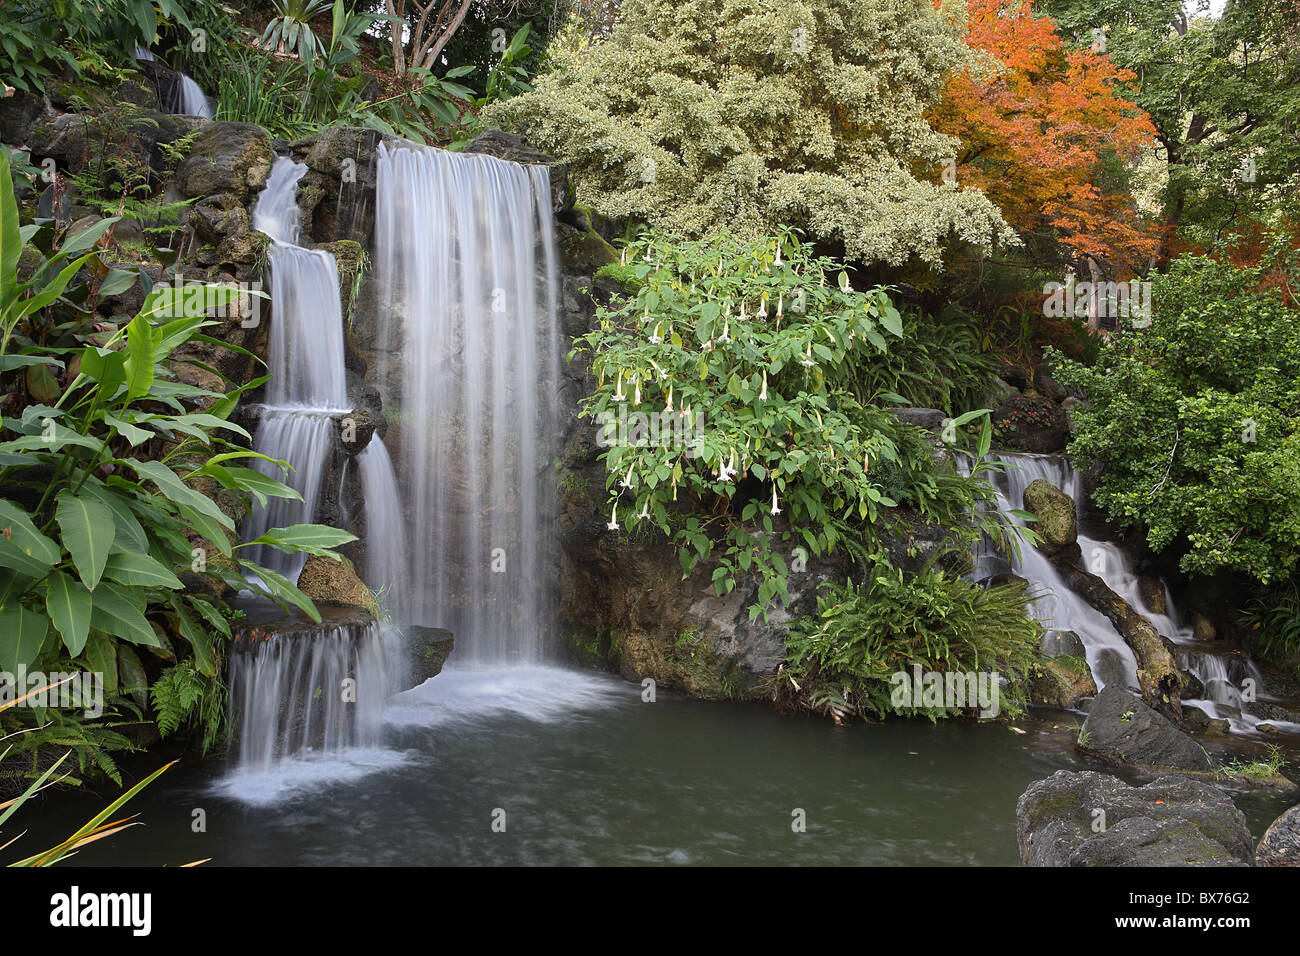 Waterfall in autumn or fall with hanging flowers and colorful orange foliage Stock Photo